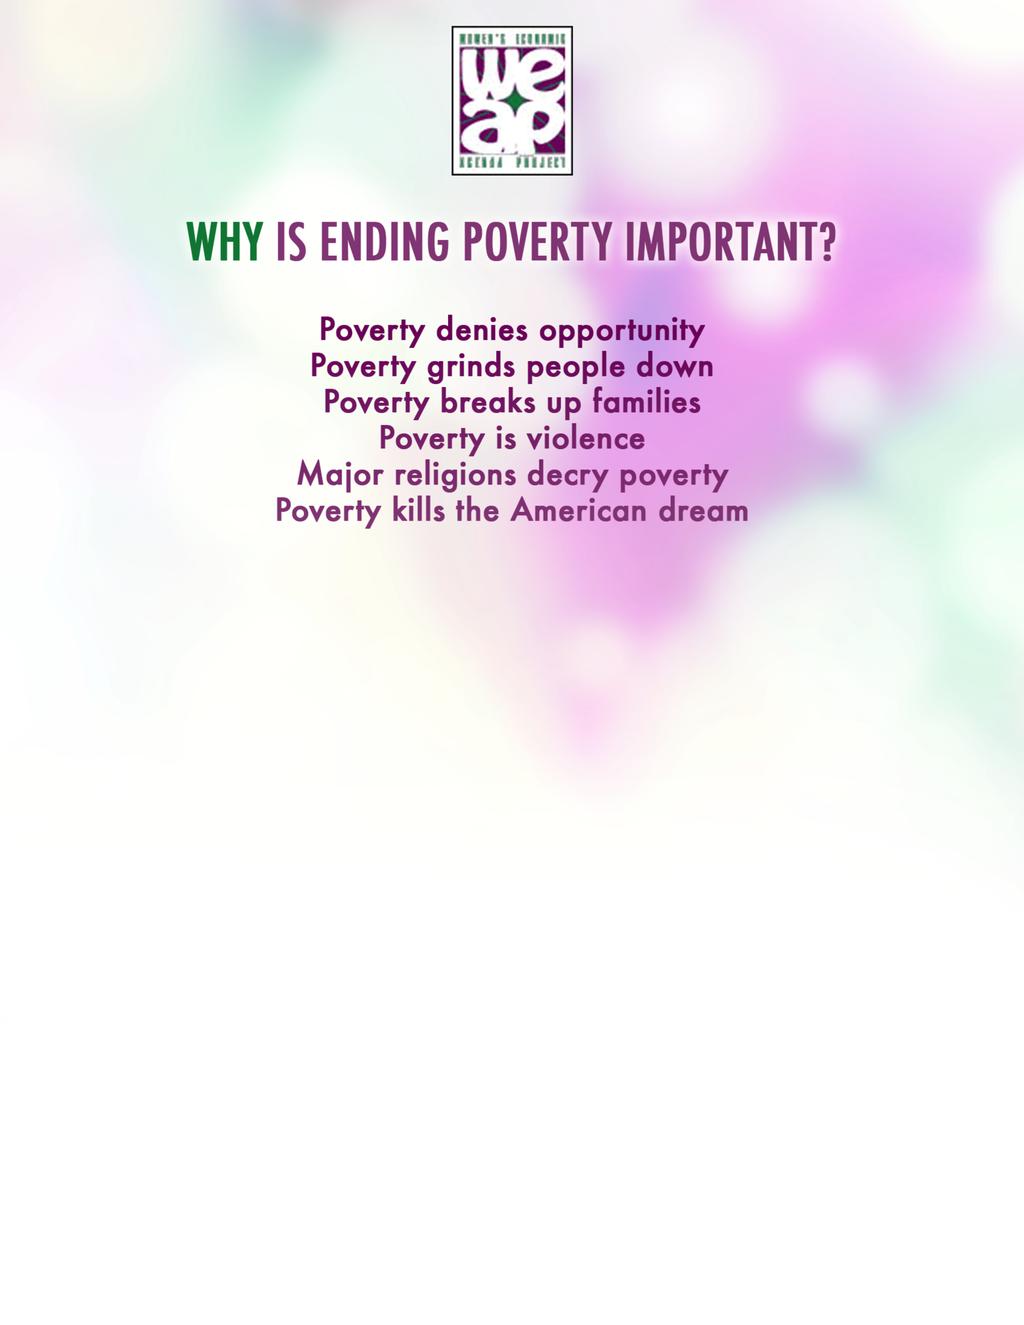 Ending Poverty is important because, as Nelson Mandela said: "Poverty is not an accident...it is man-made and can be removed by the actions of human beings.